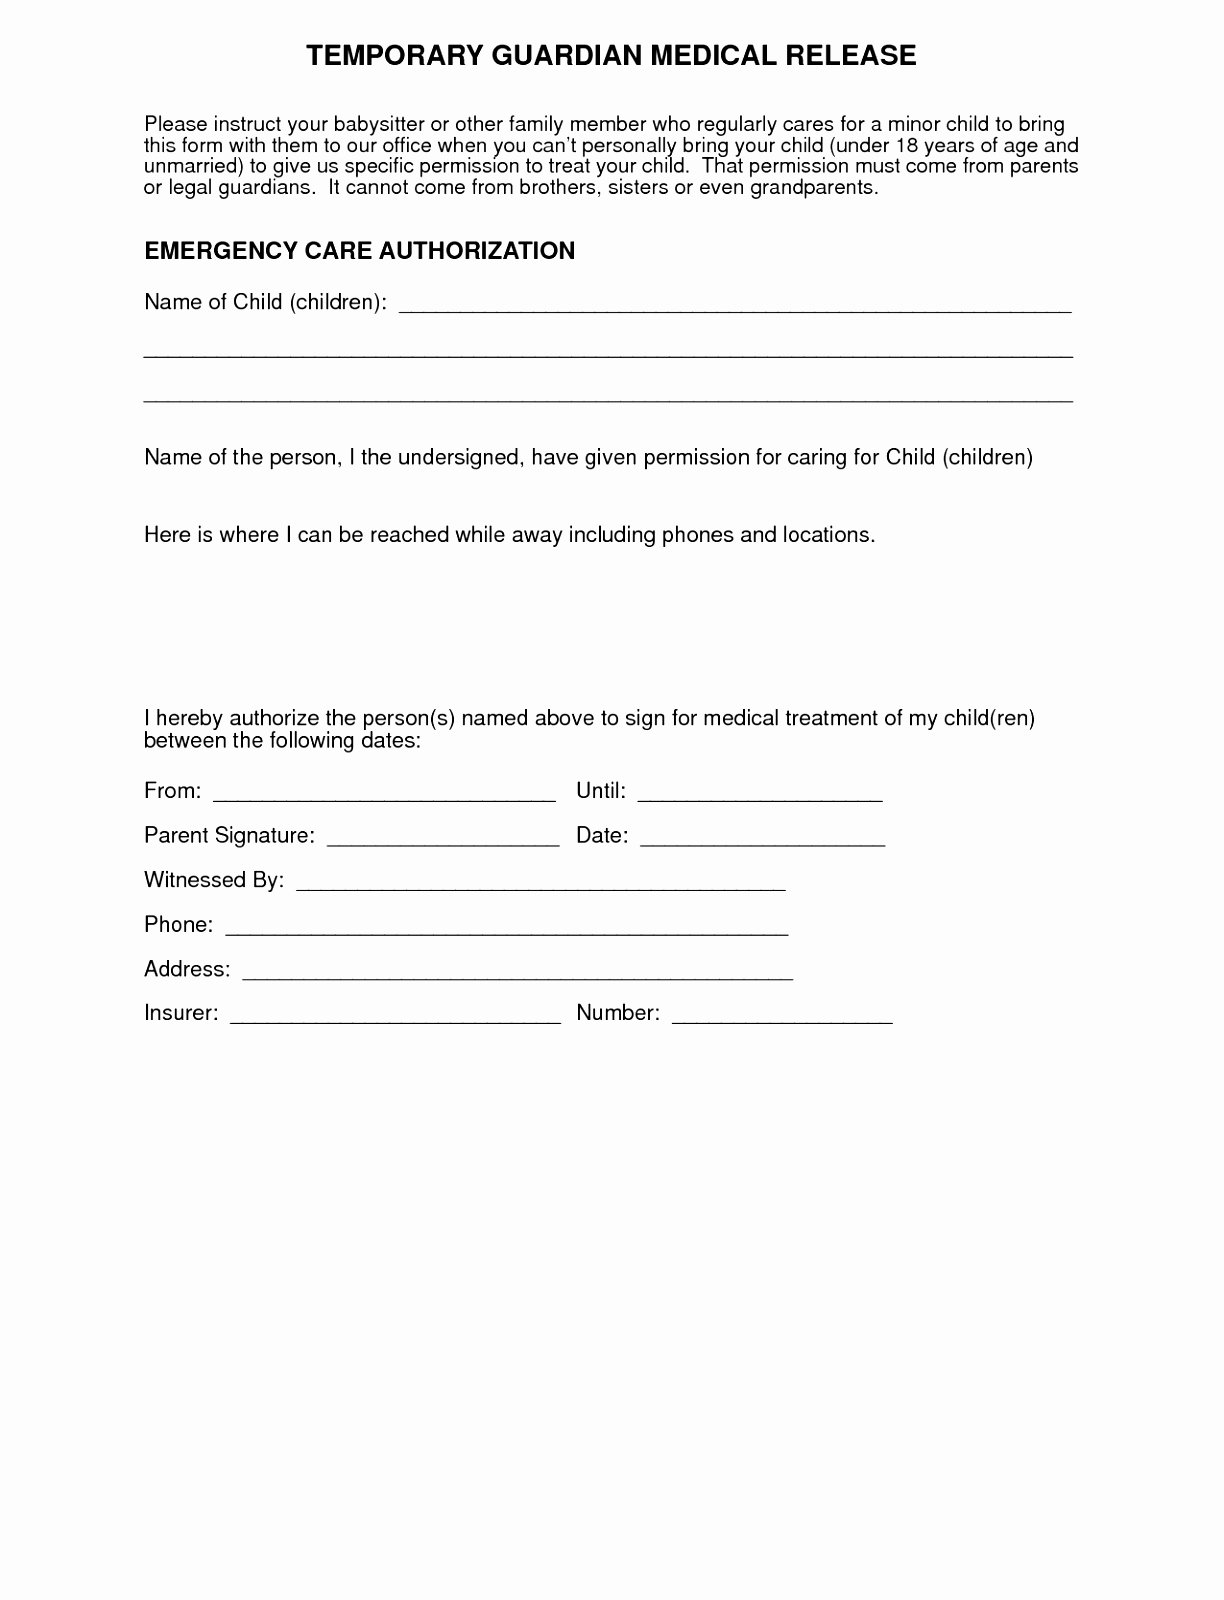 Image Release form Template Best Of 5 Parental Release form Template Euuiq